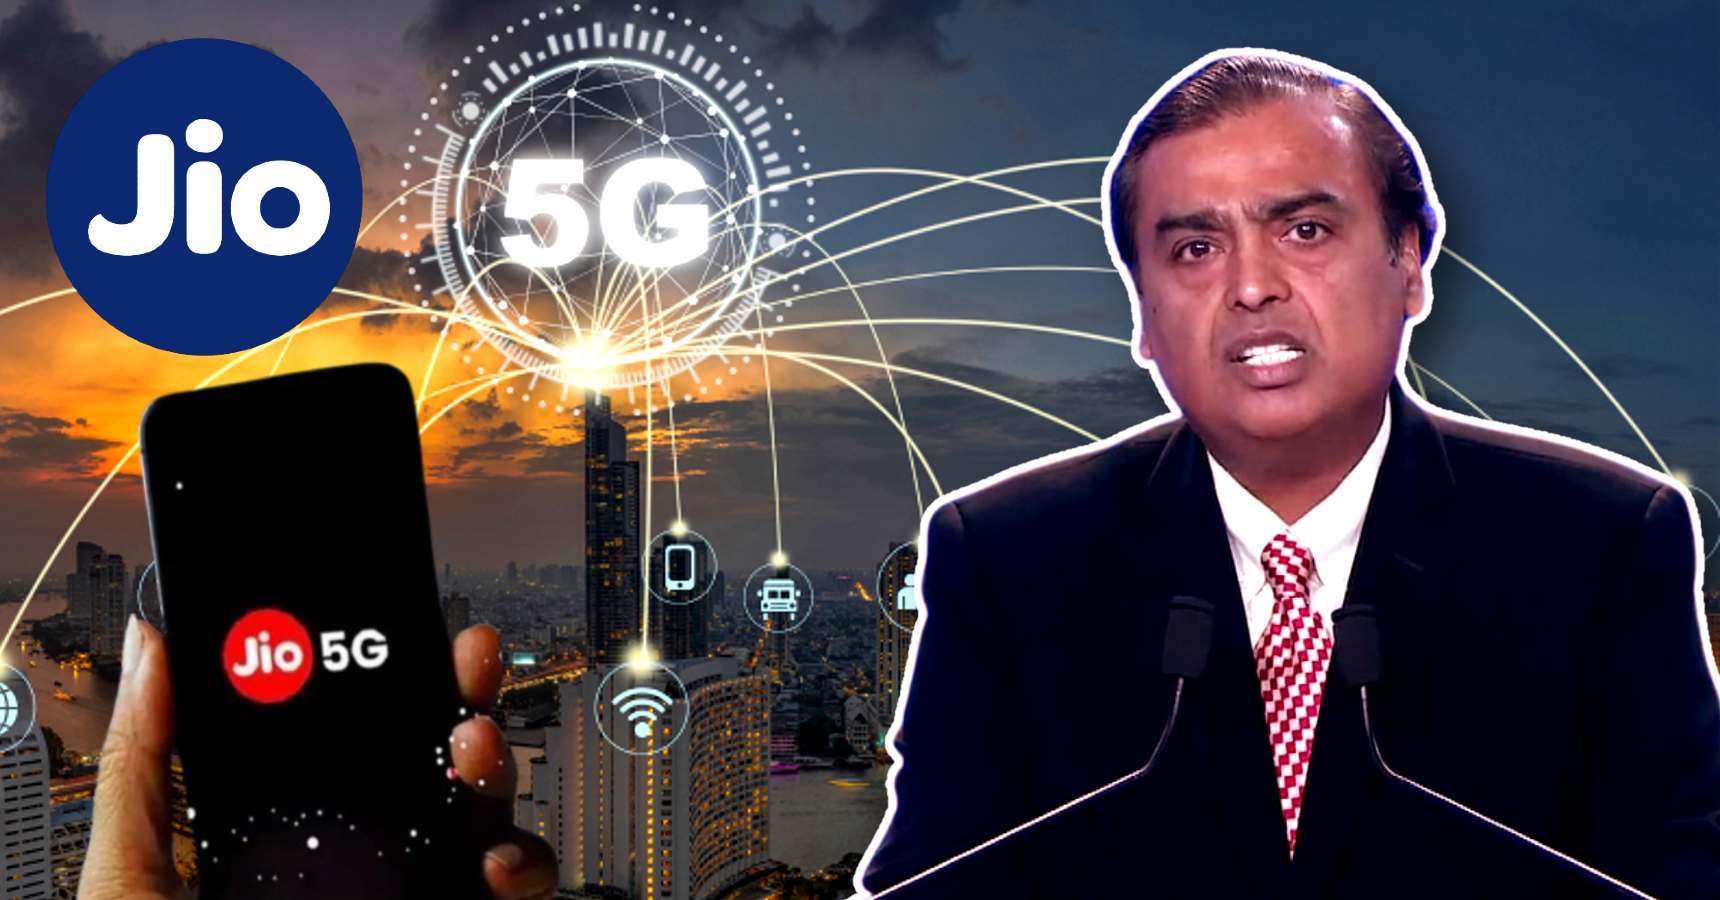 No More Unlimited Jio 5G but Good news for users who will recharge now